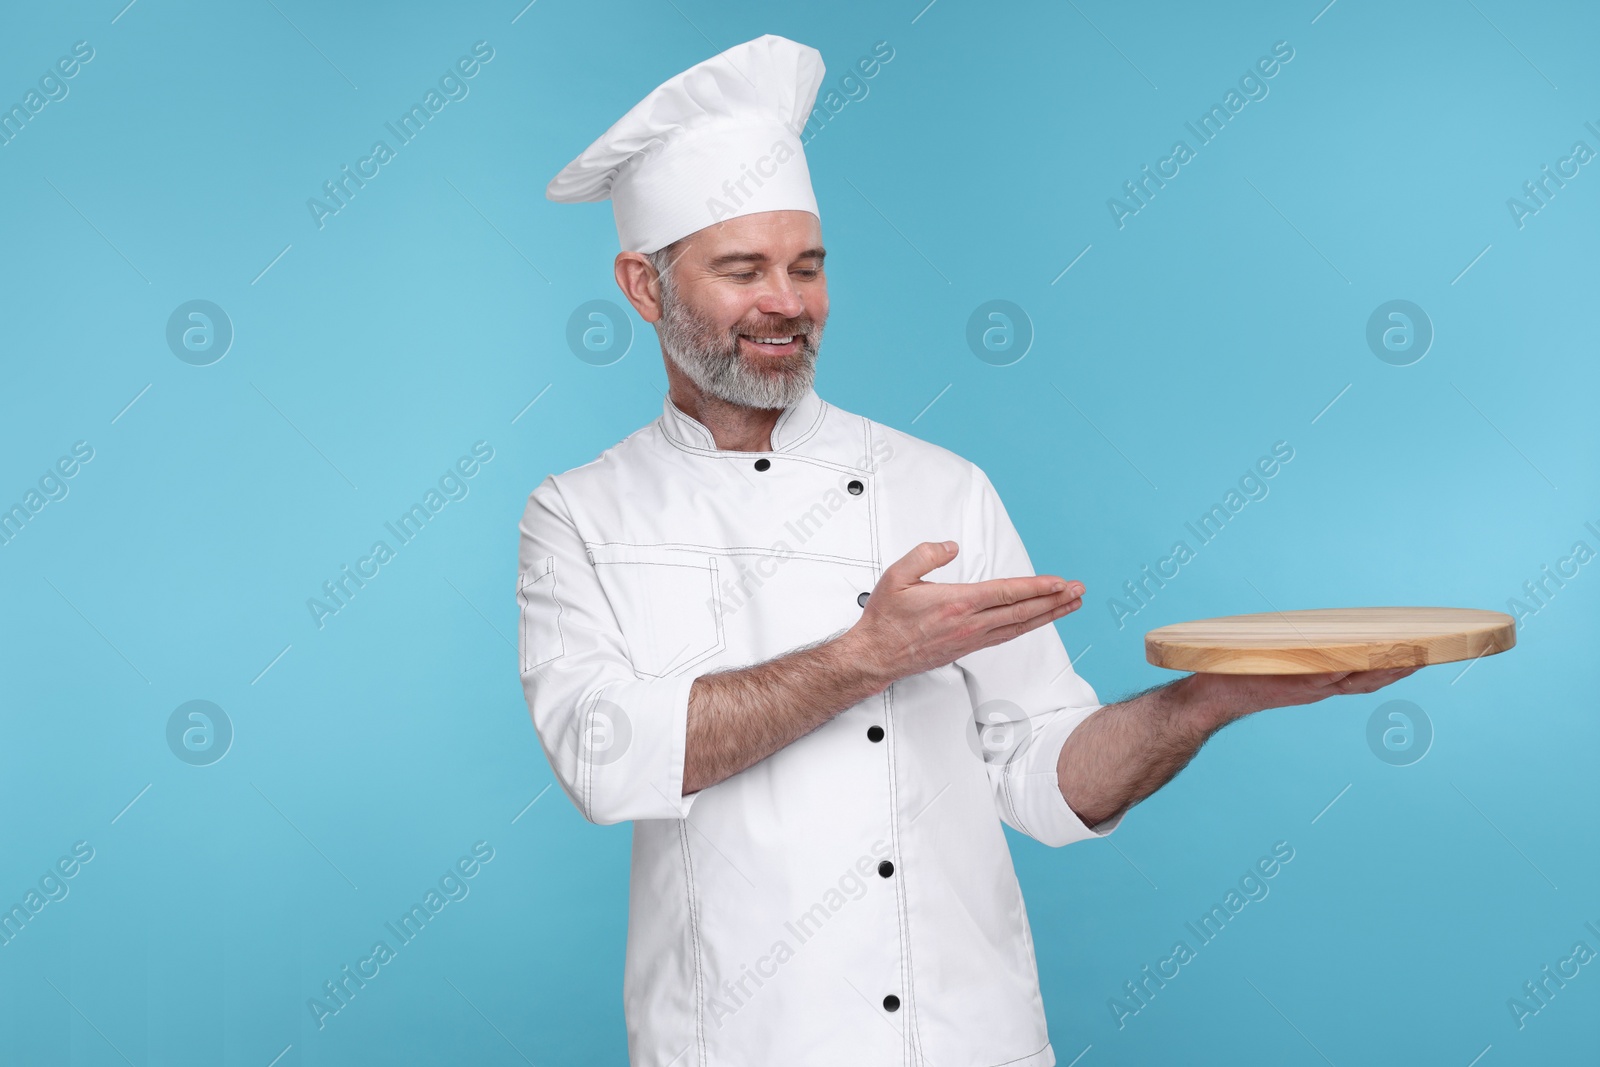 Photo of Happy chef in uniform showing wooden board on light blue background